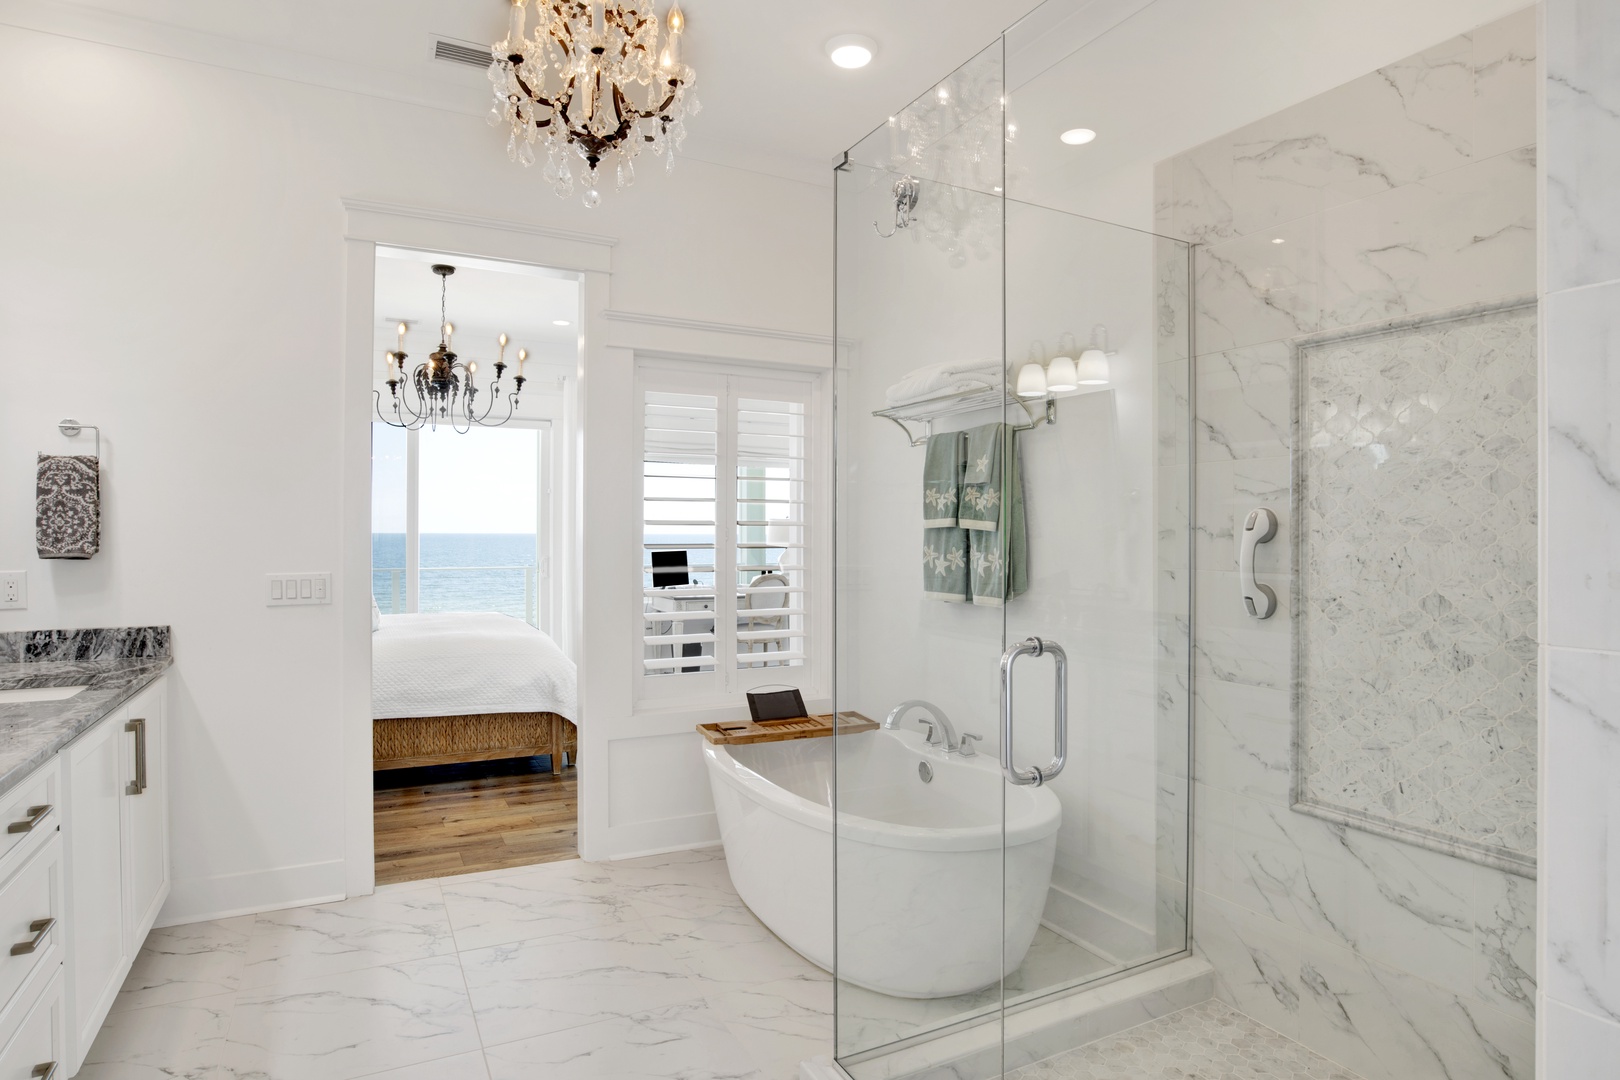 The master bath features a soaking tub with views of the Gulf